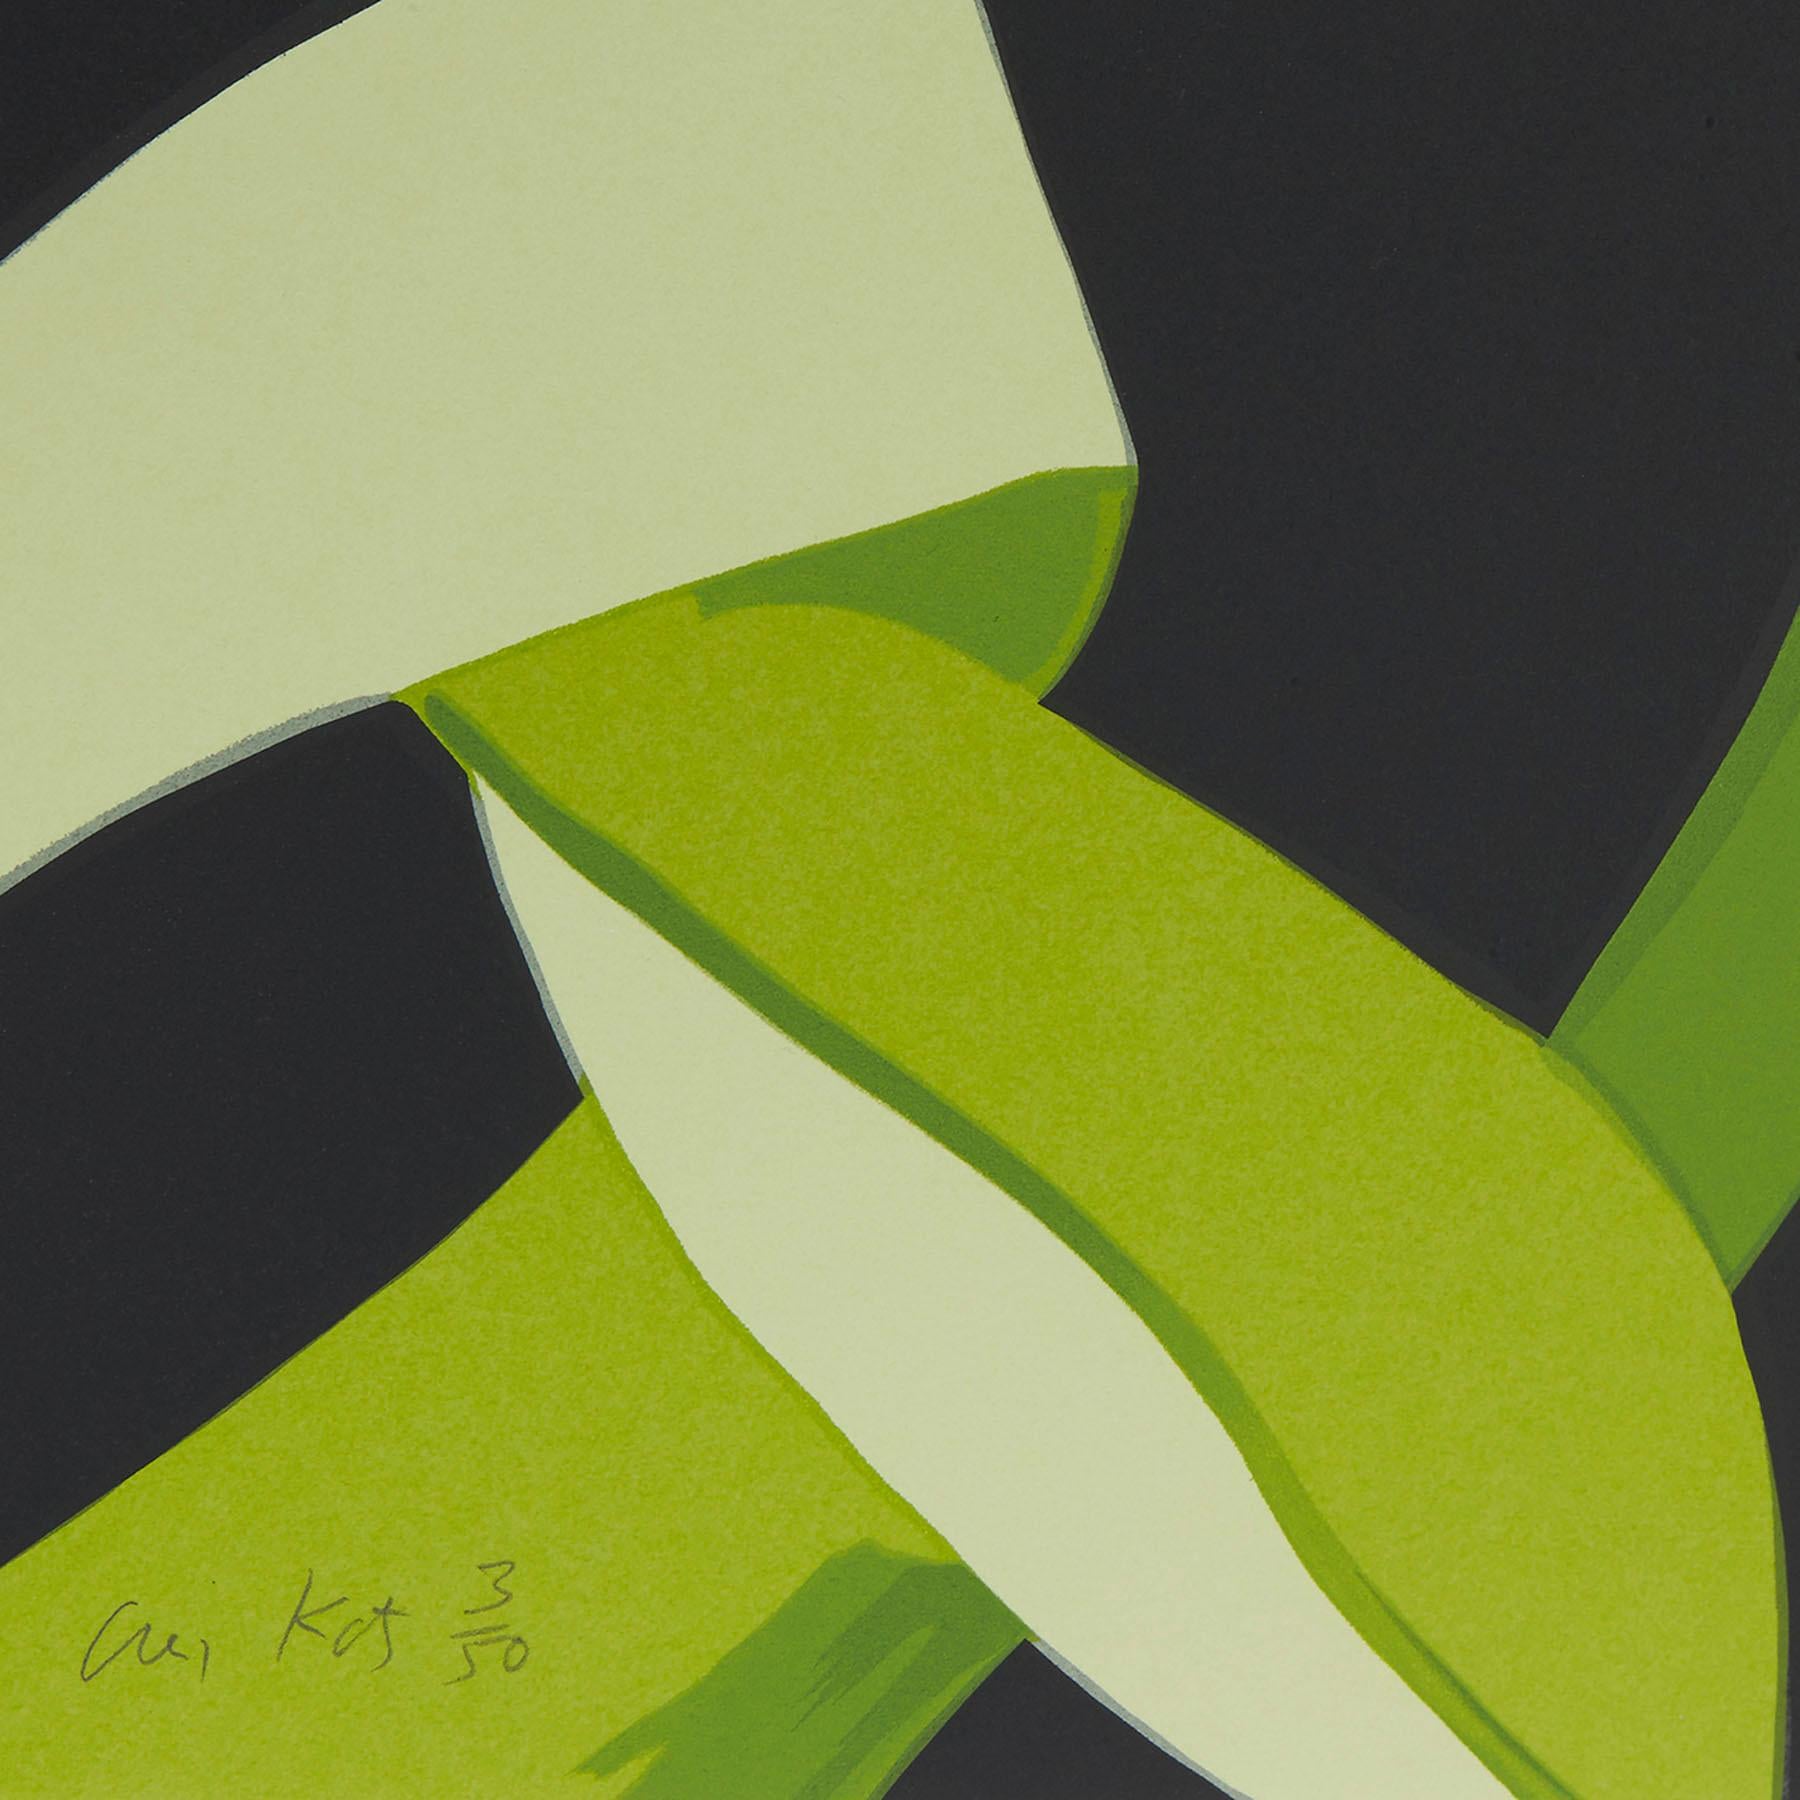 Alex Katz, Yellow Tulips
Contemporary, 21st Century, Silkscreen, Limited Edition
Edition of 50
122,5 x 195,7 cm (48.2 x 77 in.)
Signed and numbered, accompanied by Certificate of Authenticity
In mint condition, as acquired from the publisher

PLEASE